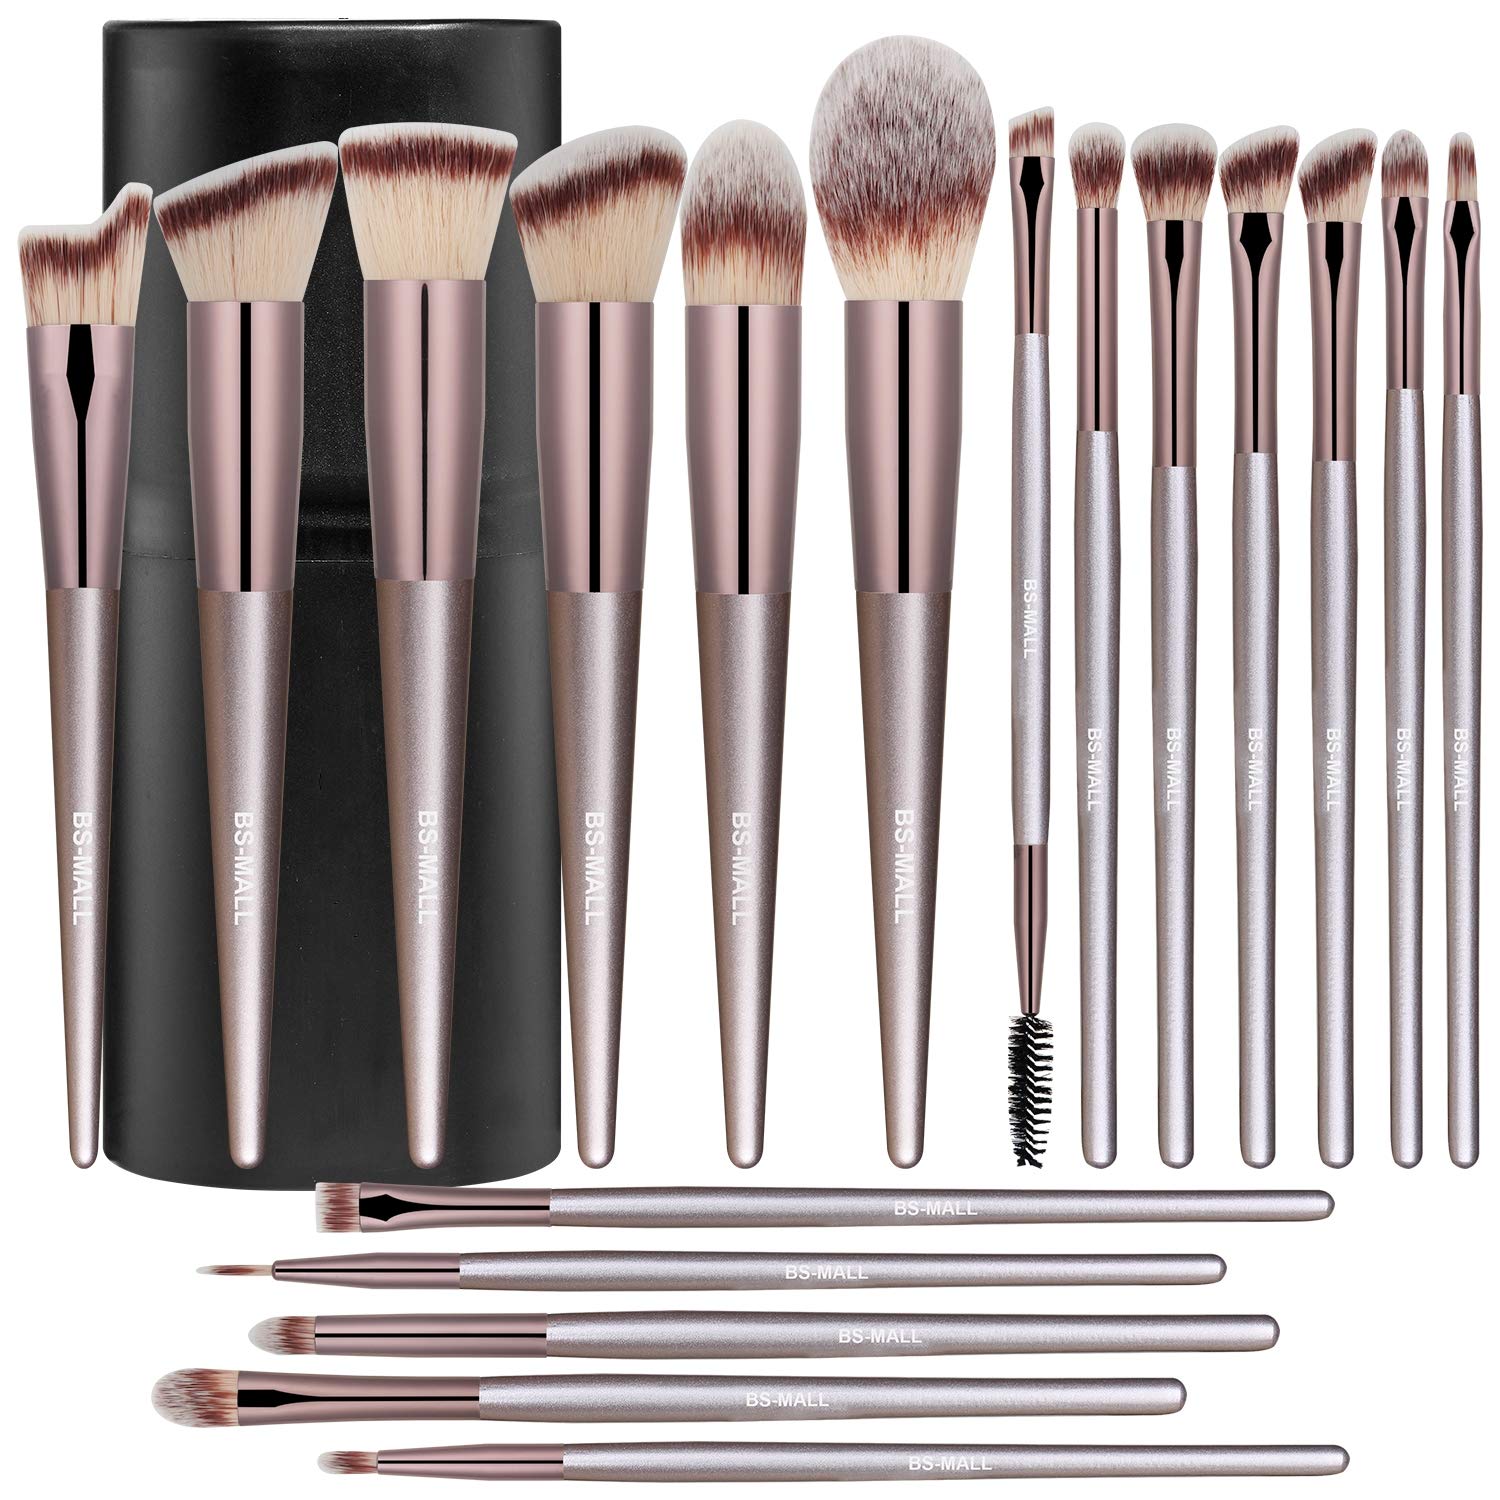 BS-MALL Makeup Brush Set 18 Pcs Premium Synthetic Foundation Powder concealers Eye shadows Blush Makeup Brushes with black case 